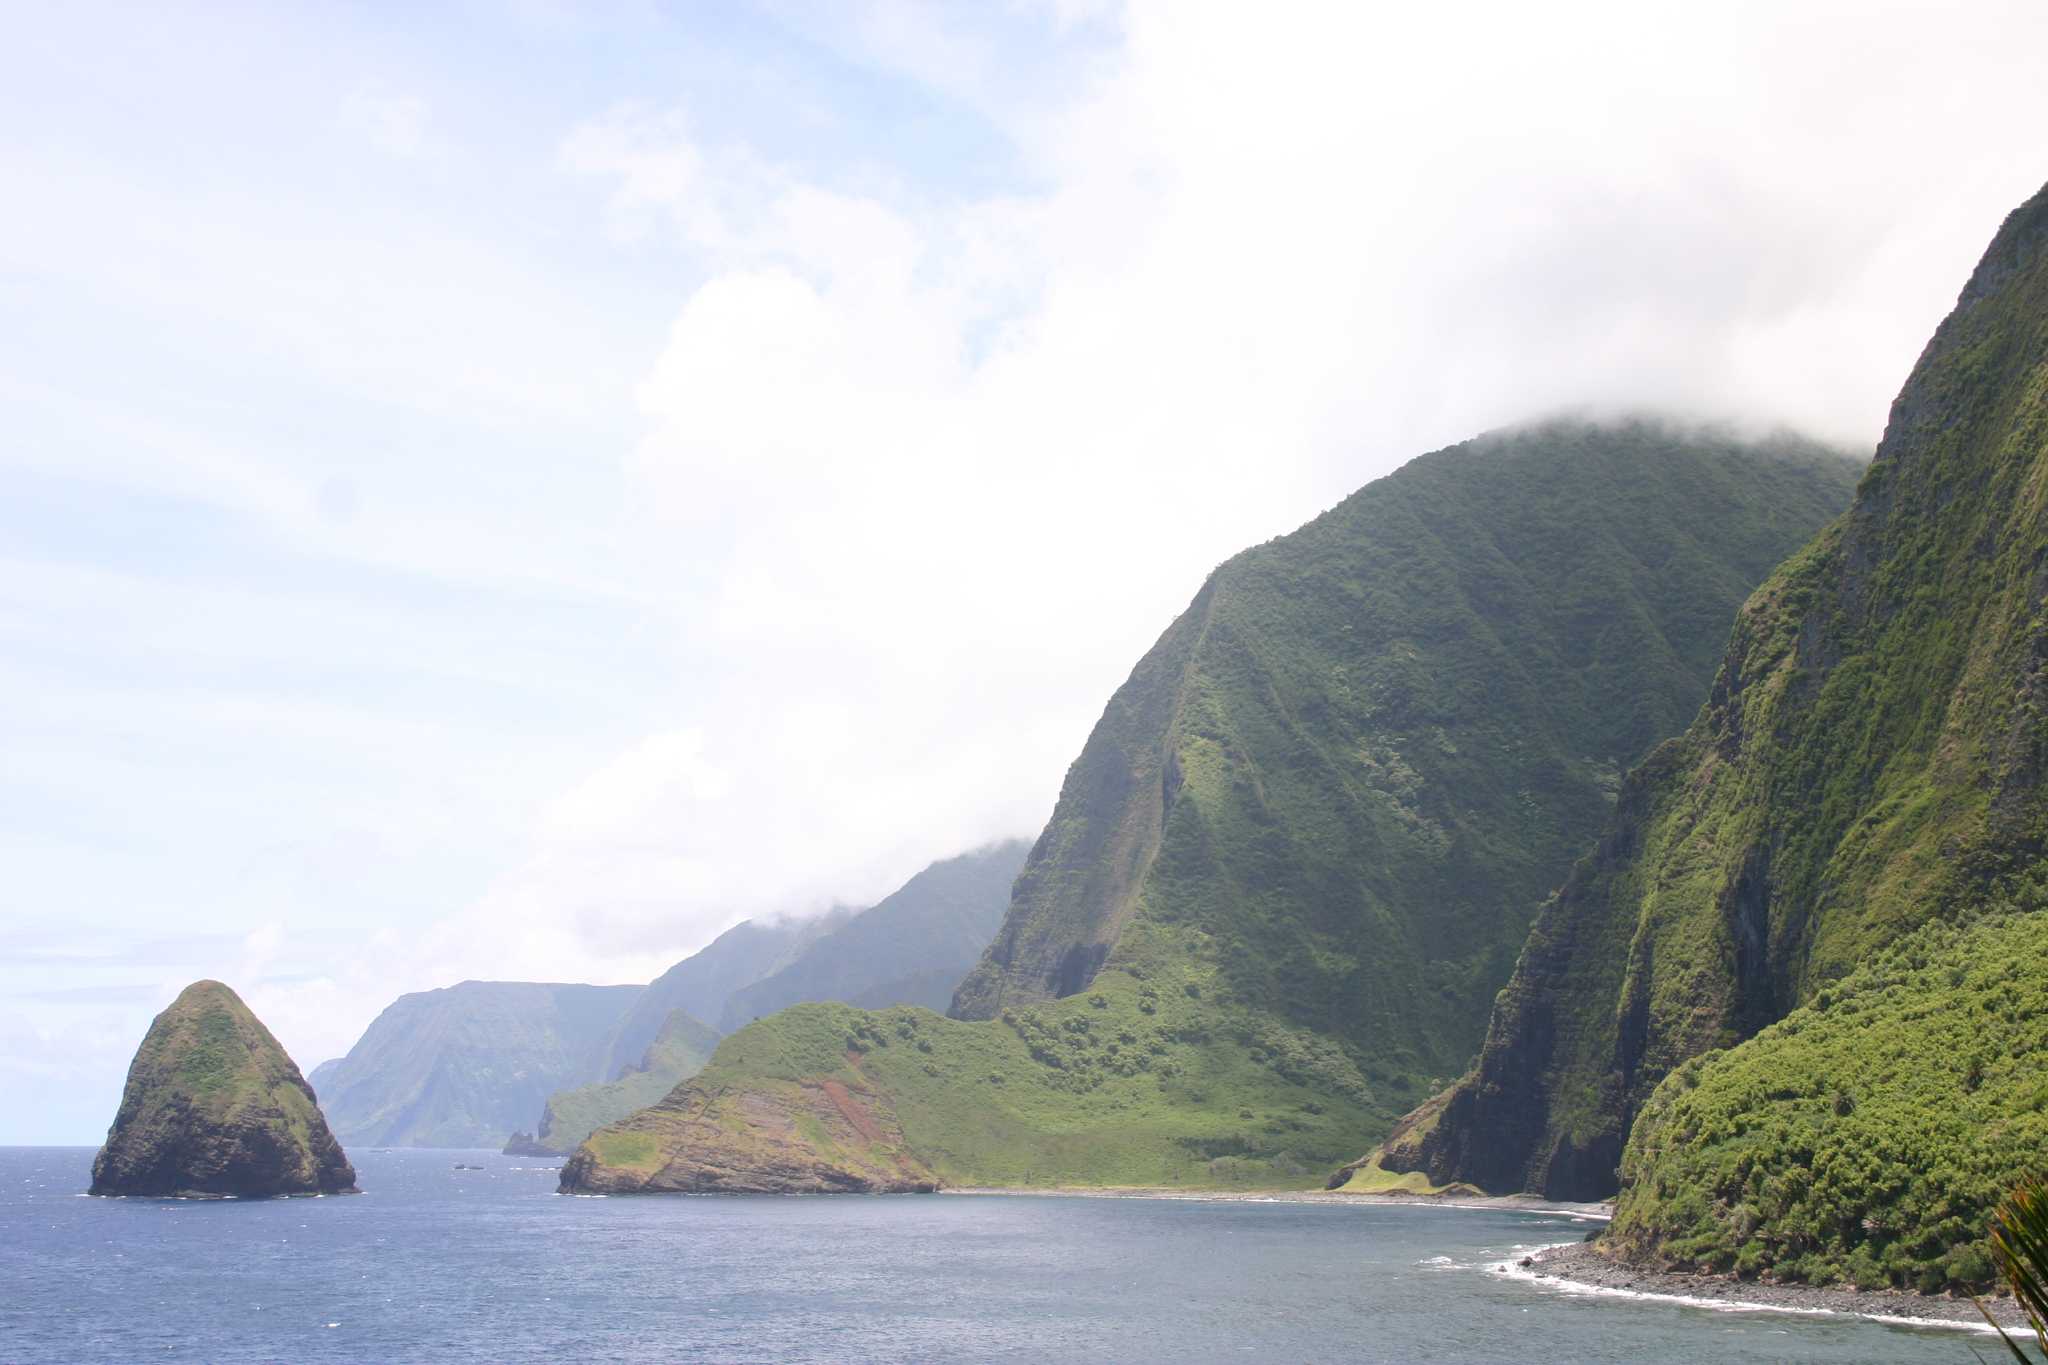 On Molokai island, the site of an 1860s leper colony draws determined travelers - SFGate